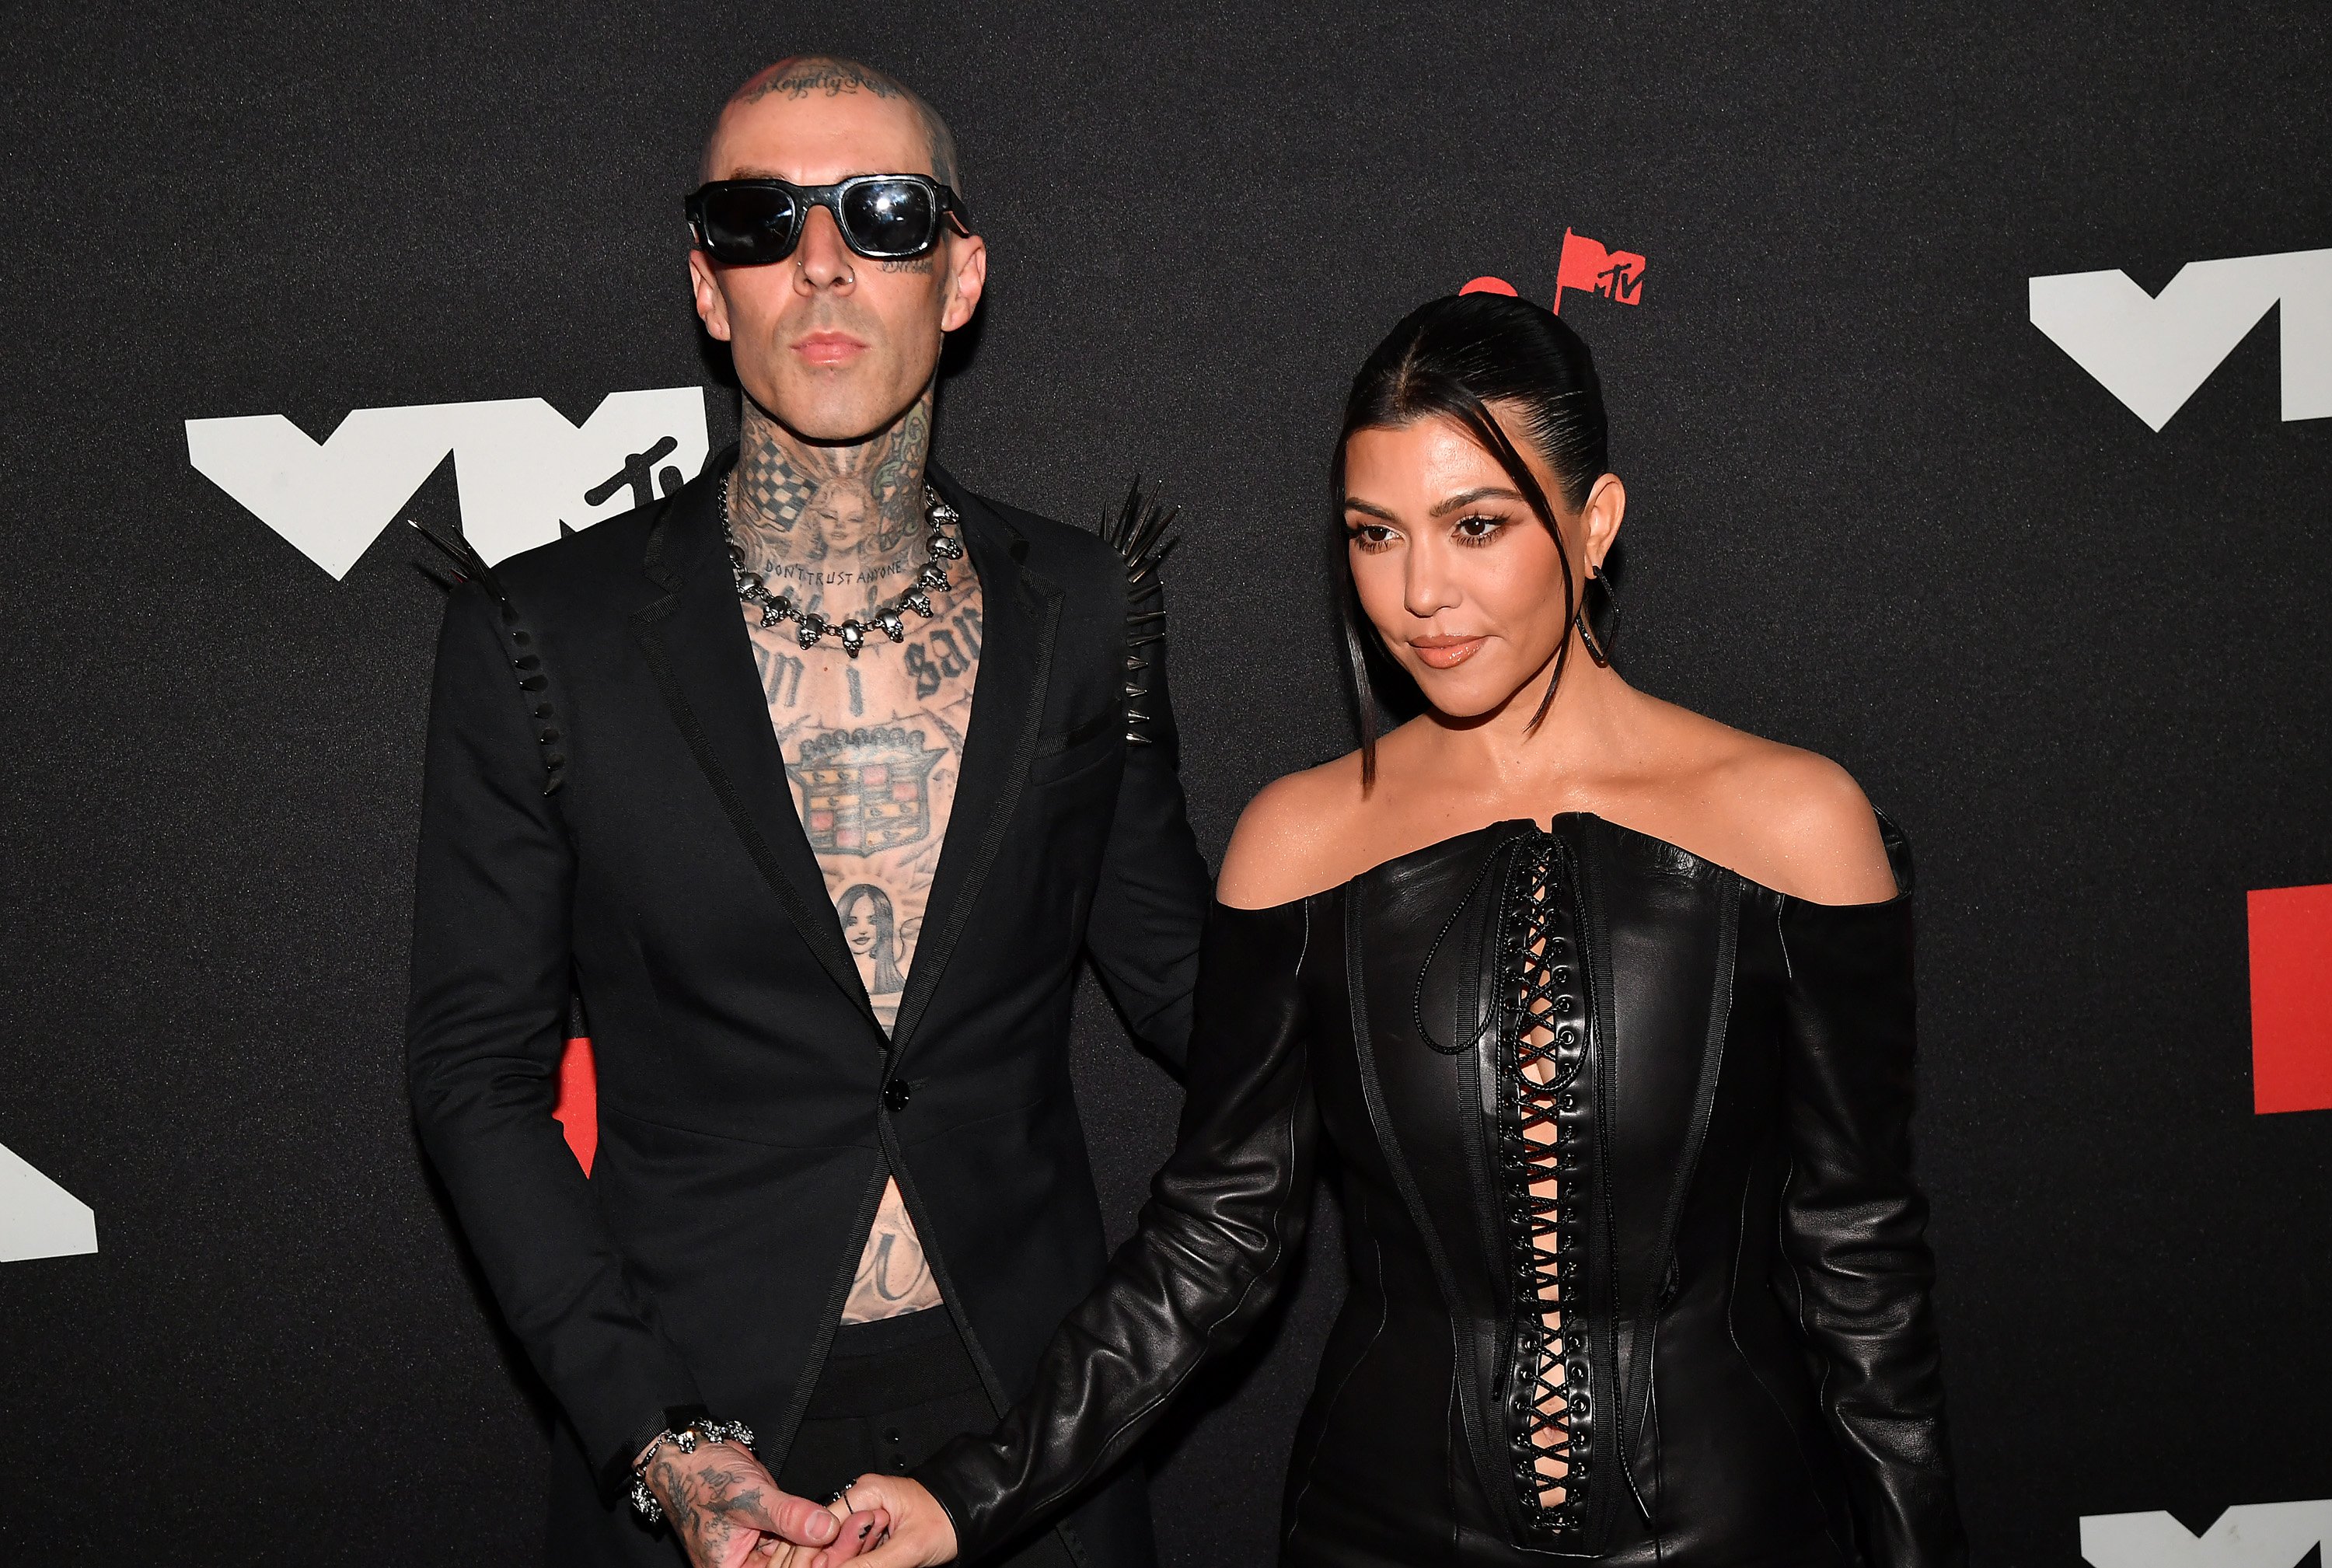 Travis Barker and Kourtney Kardashian holding hands on the red carpet at the 2021 MTV Video Music Awards